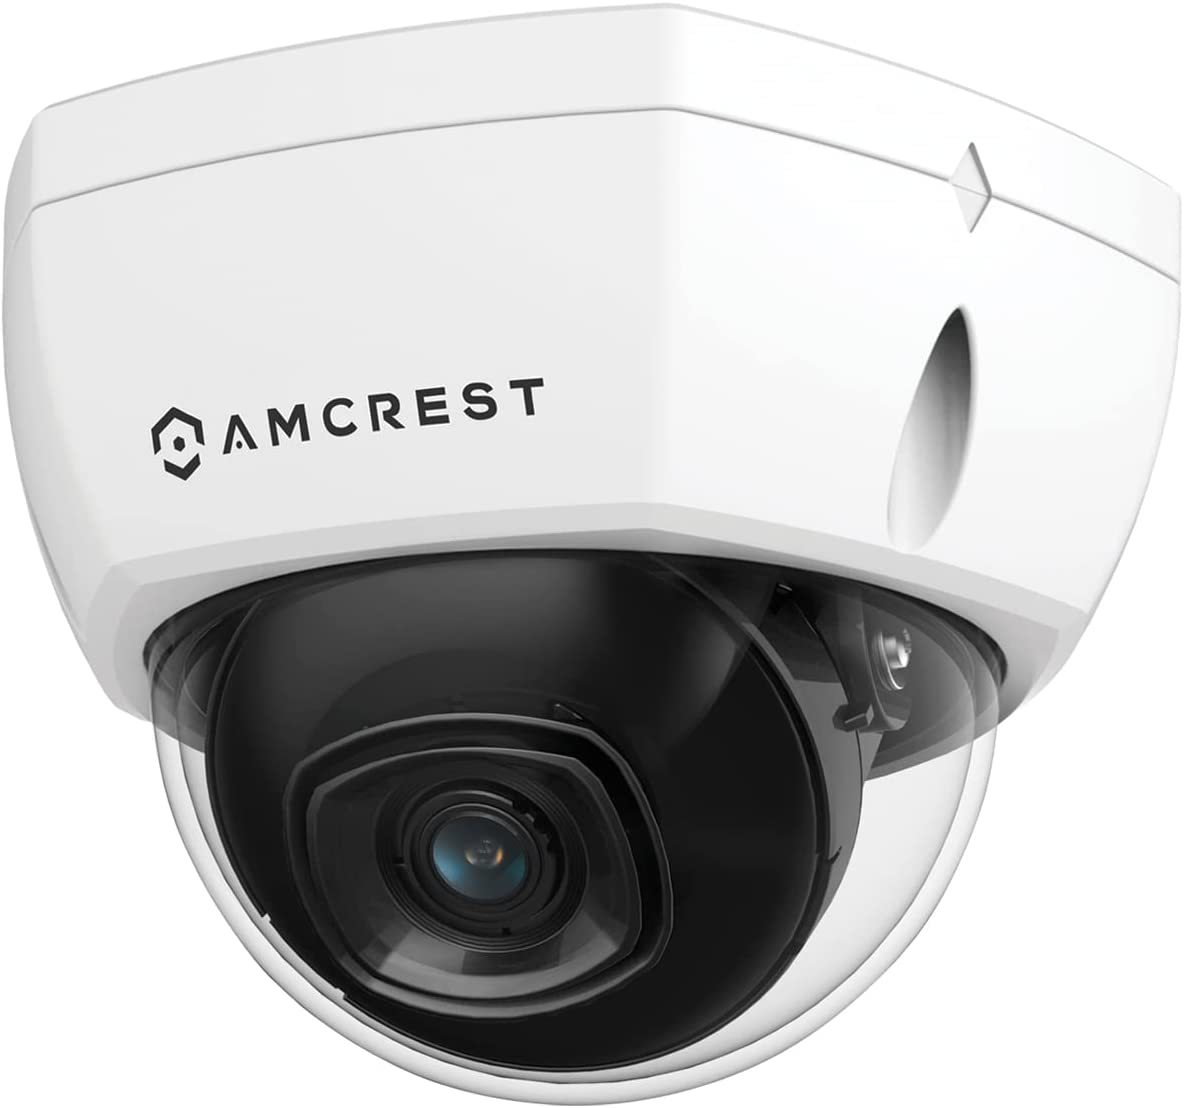 Primary image for Amcrest Ultrahd 4K (8Mp) Outdoor Security Poe Ip Camera, 3840X2160,, Ip8M-2493Ew